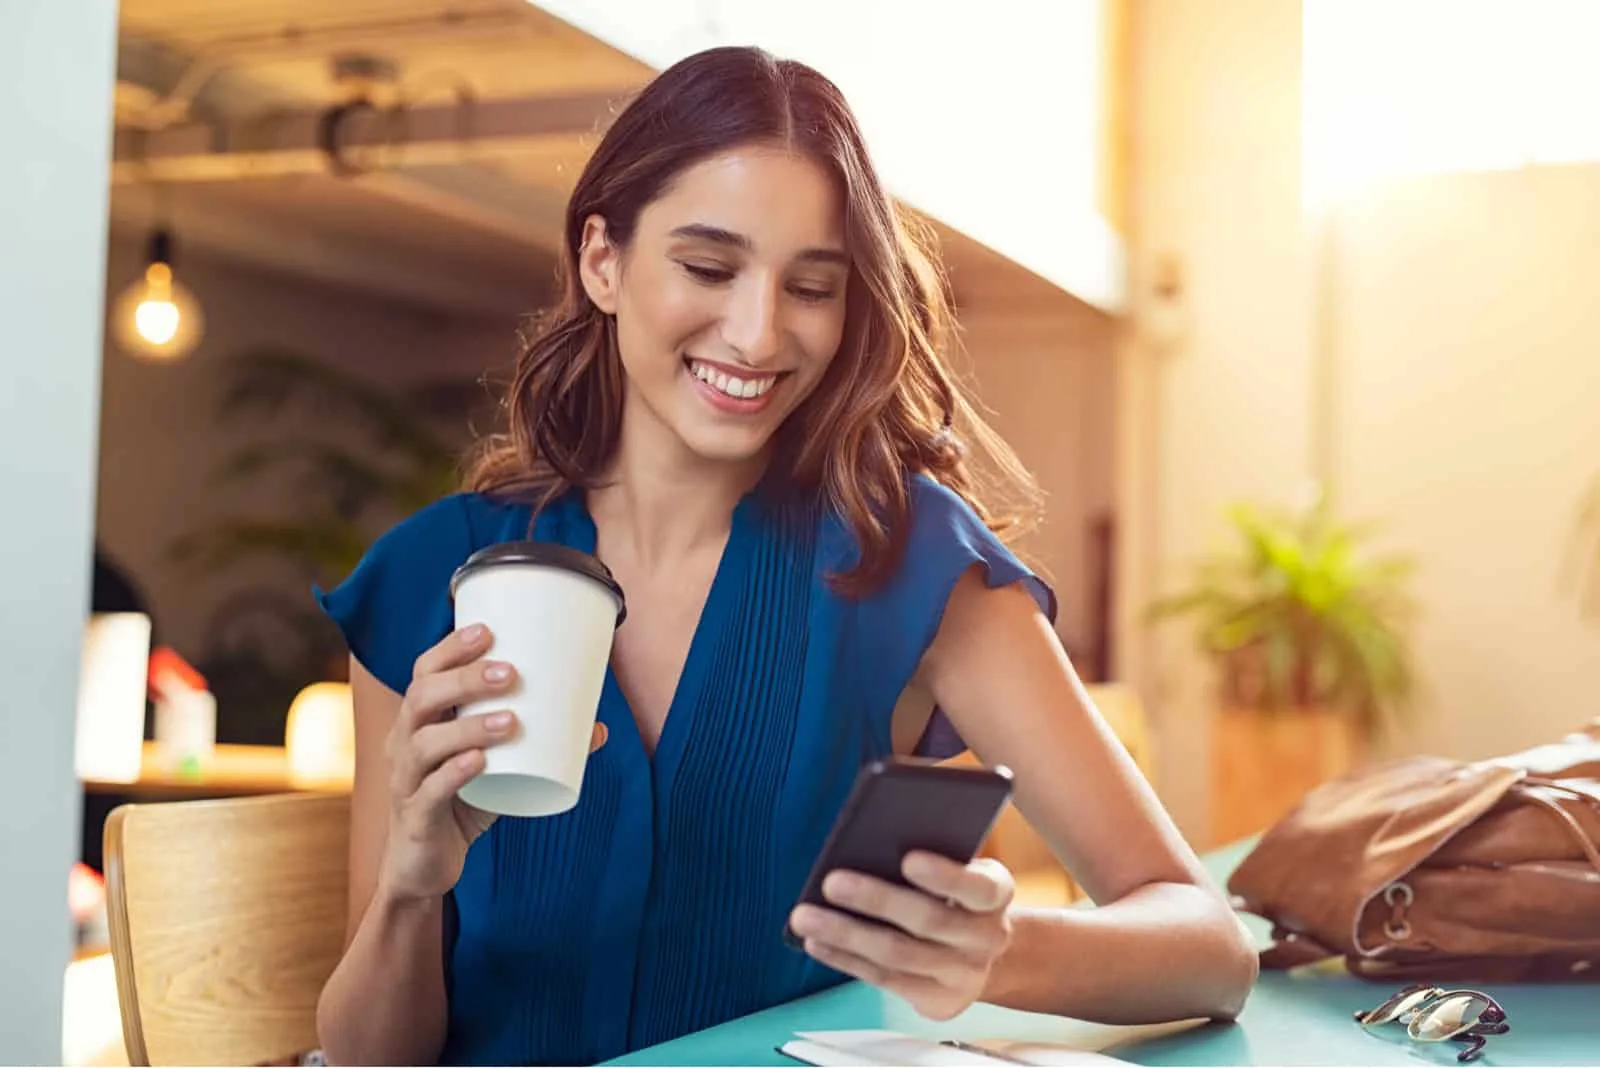 a smiling woman sitting drinking coffee and typing on the phone